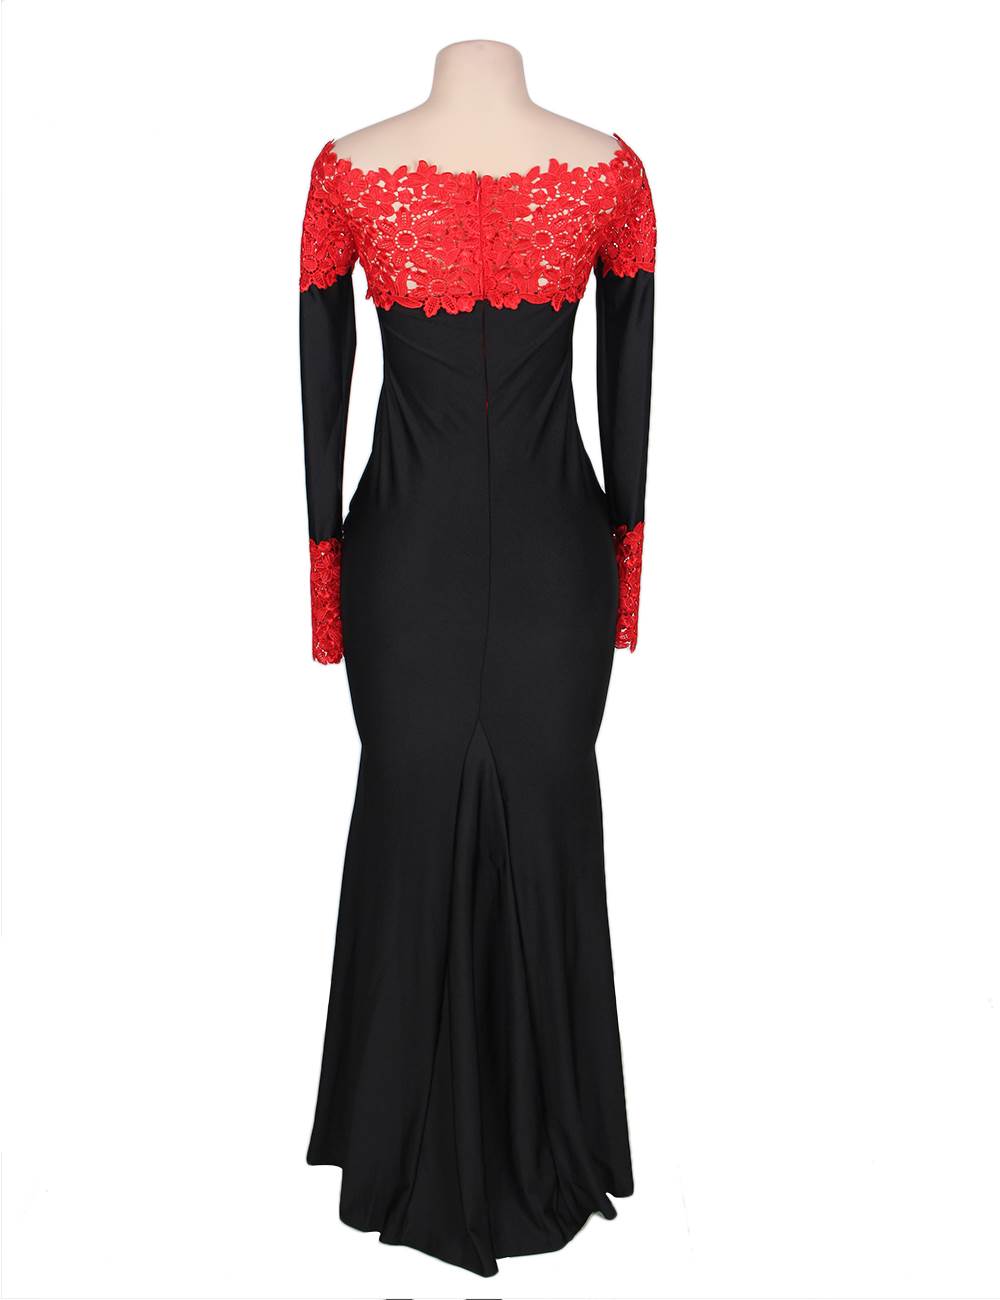 Buy The High Performance Price Ratio Evening Dress Online At Ohyeah888.com